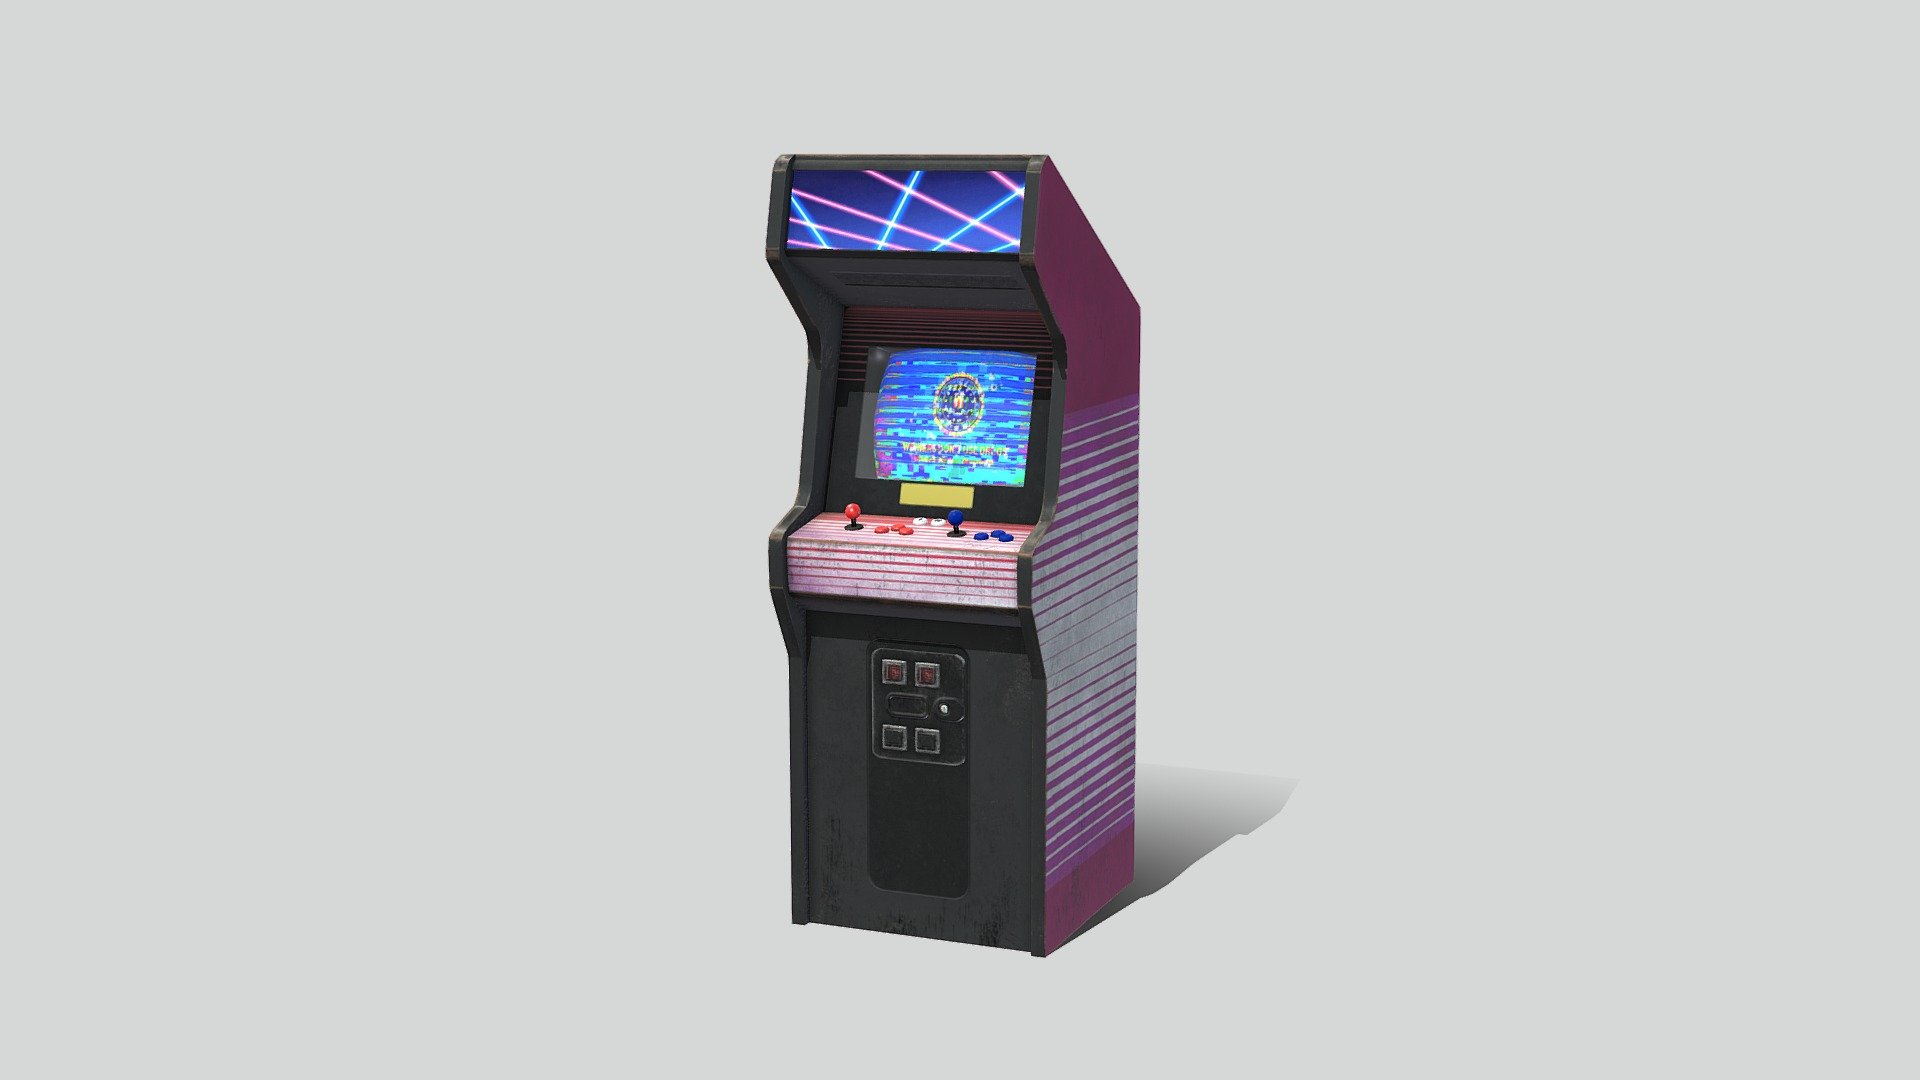 Arcade Cabinet with unique Materials, Textures, Decals and Graphics meant for AAA, Educational &amp; Independent Game Development &amp; Simulation Projects.


FBX Scene/File with Albedo &amp; Normals linked for reference.
1424 Triangles.
2 x PBR Materials &amp; 2048x2048, 1024x2048 Textures.
PNG's, Albedo, Normal, Rough, Occlusion, Emissive.
Original Graphics, Patterns &amp; Decals.

Copyright 2018 Skipper Research &amp; Development, LLC 3d model